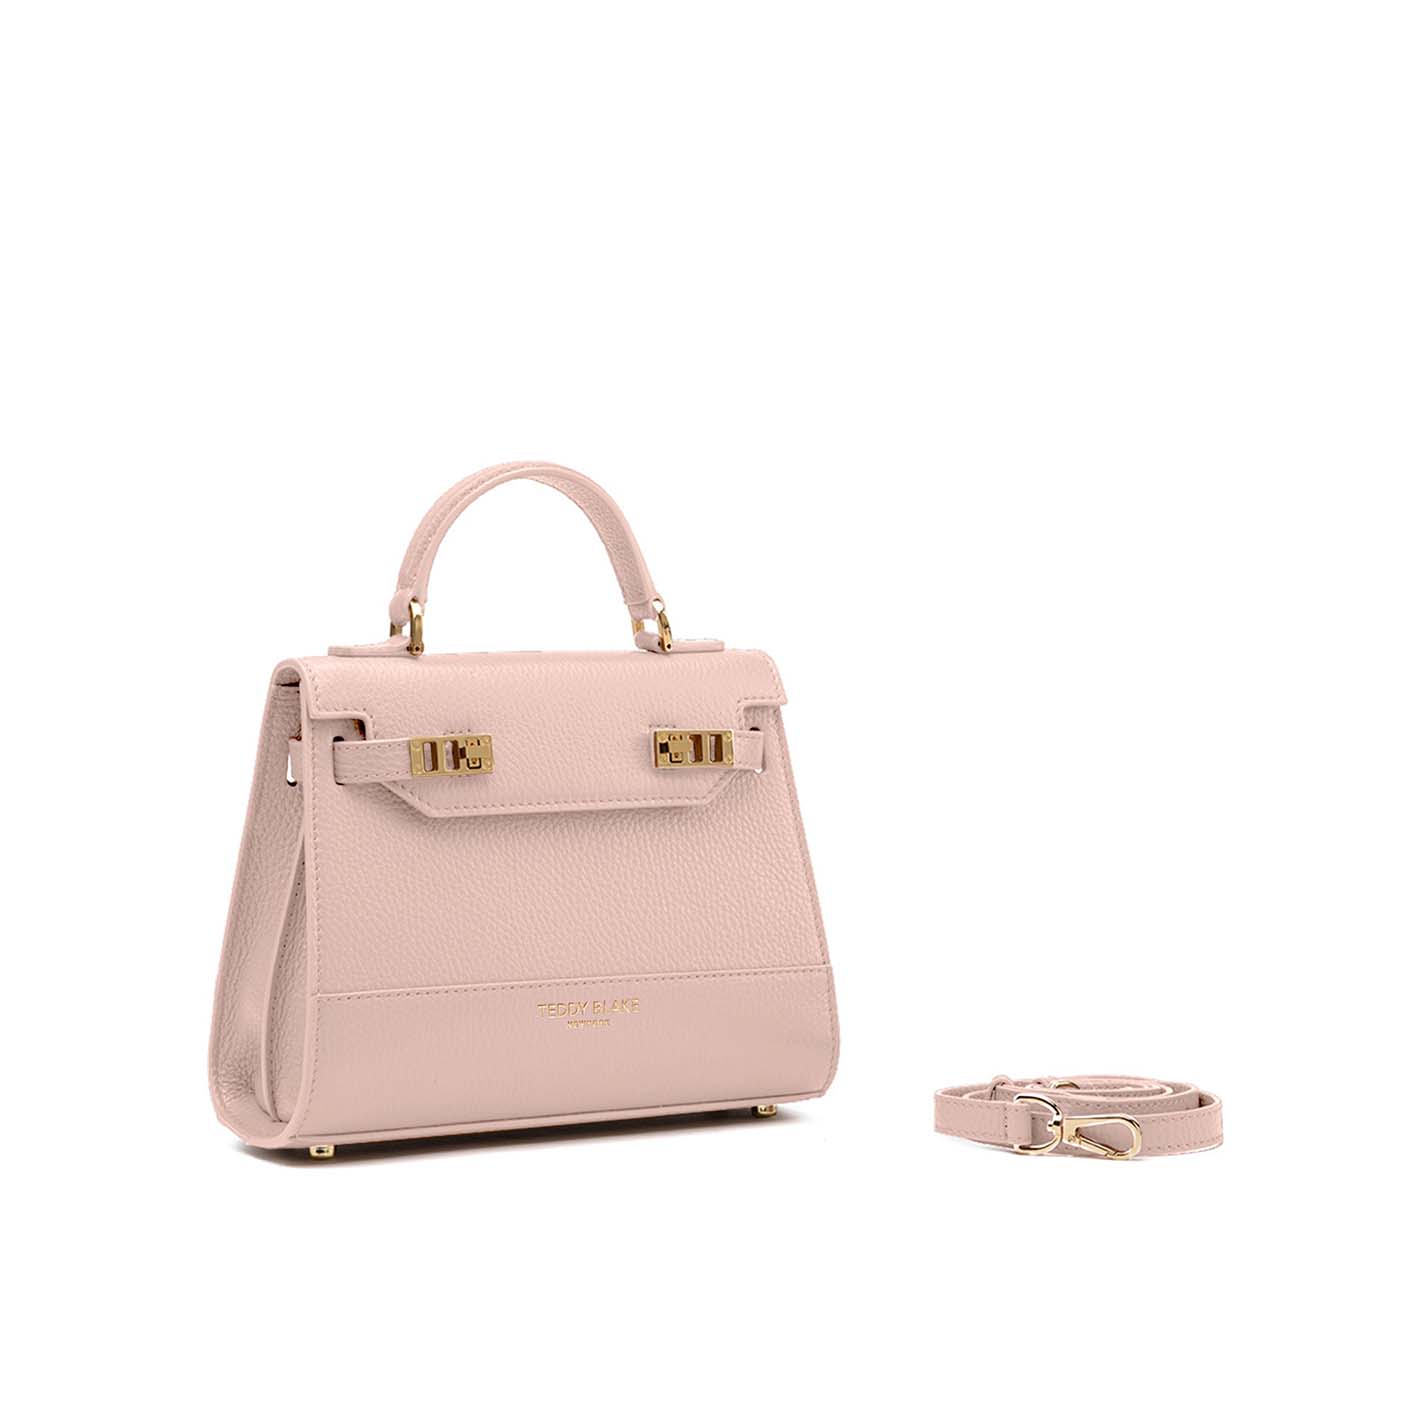 kim-stampatto-9-pink-leather-bag-with-handle